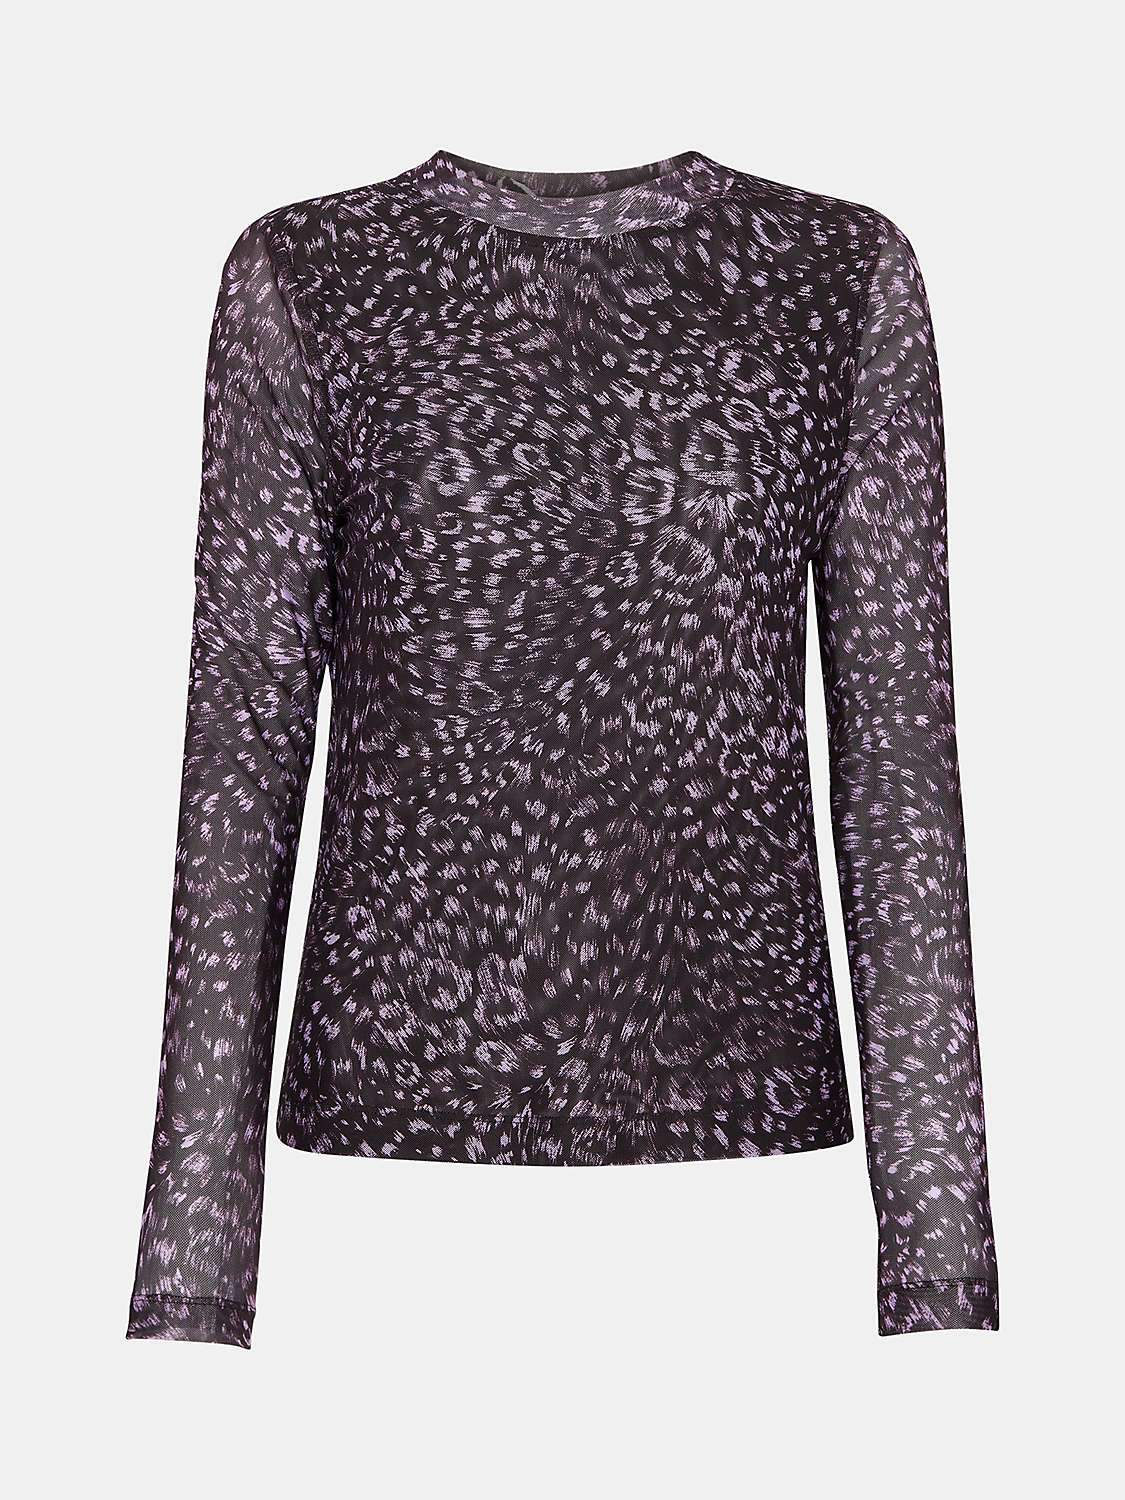 Buy Whistles Feather Leopard Print Mesh Top, Purple/Multi Online at johnlewis.com